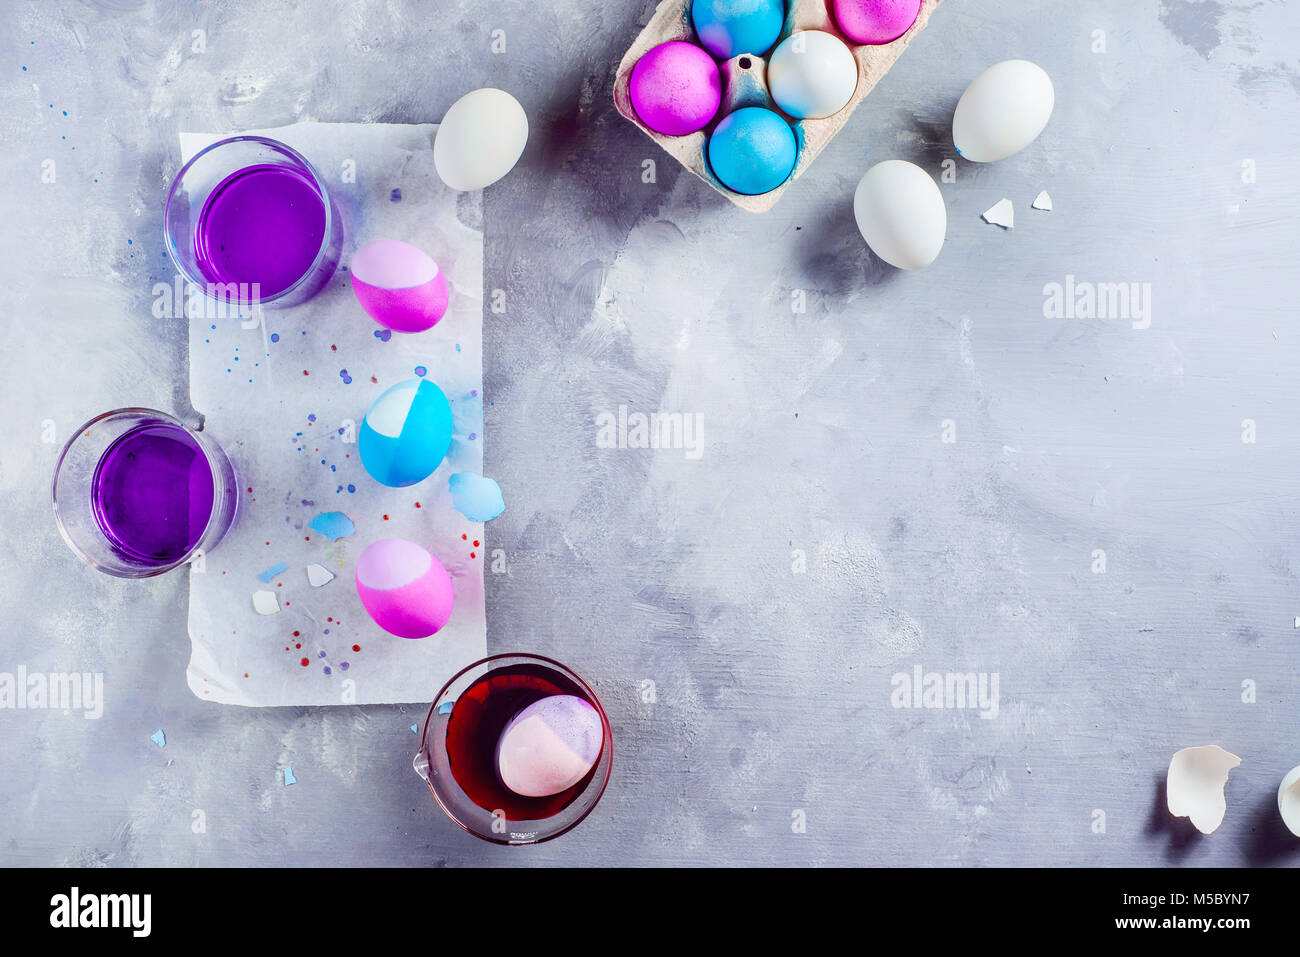 Easter eggs painting in progress. Shades of blue, pink and purple. Top view with copy space. Holiday decorations on a white concrete background. Stock Photo